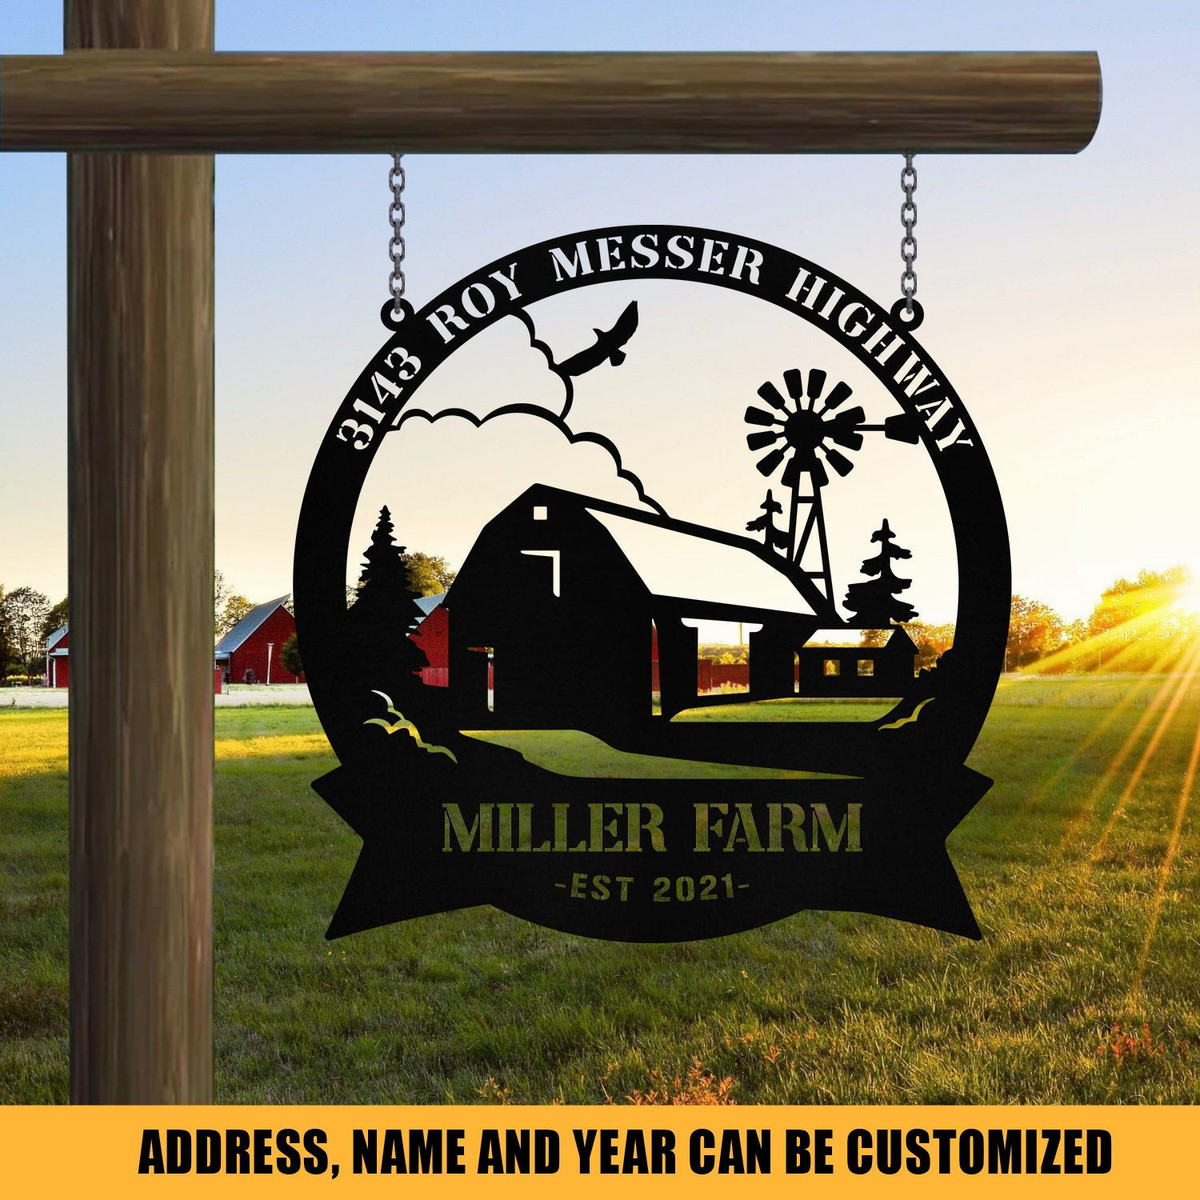 Personalized Metal Farm Sign Barn Windmill, Custom Outdoor, Entry Road, Front Gate, Metal Laser Cut Metal Signs Custom Gift Ideas 12x12IN